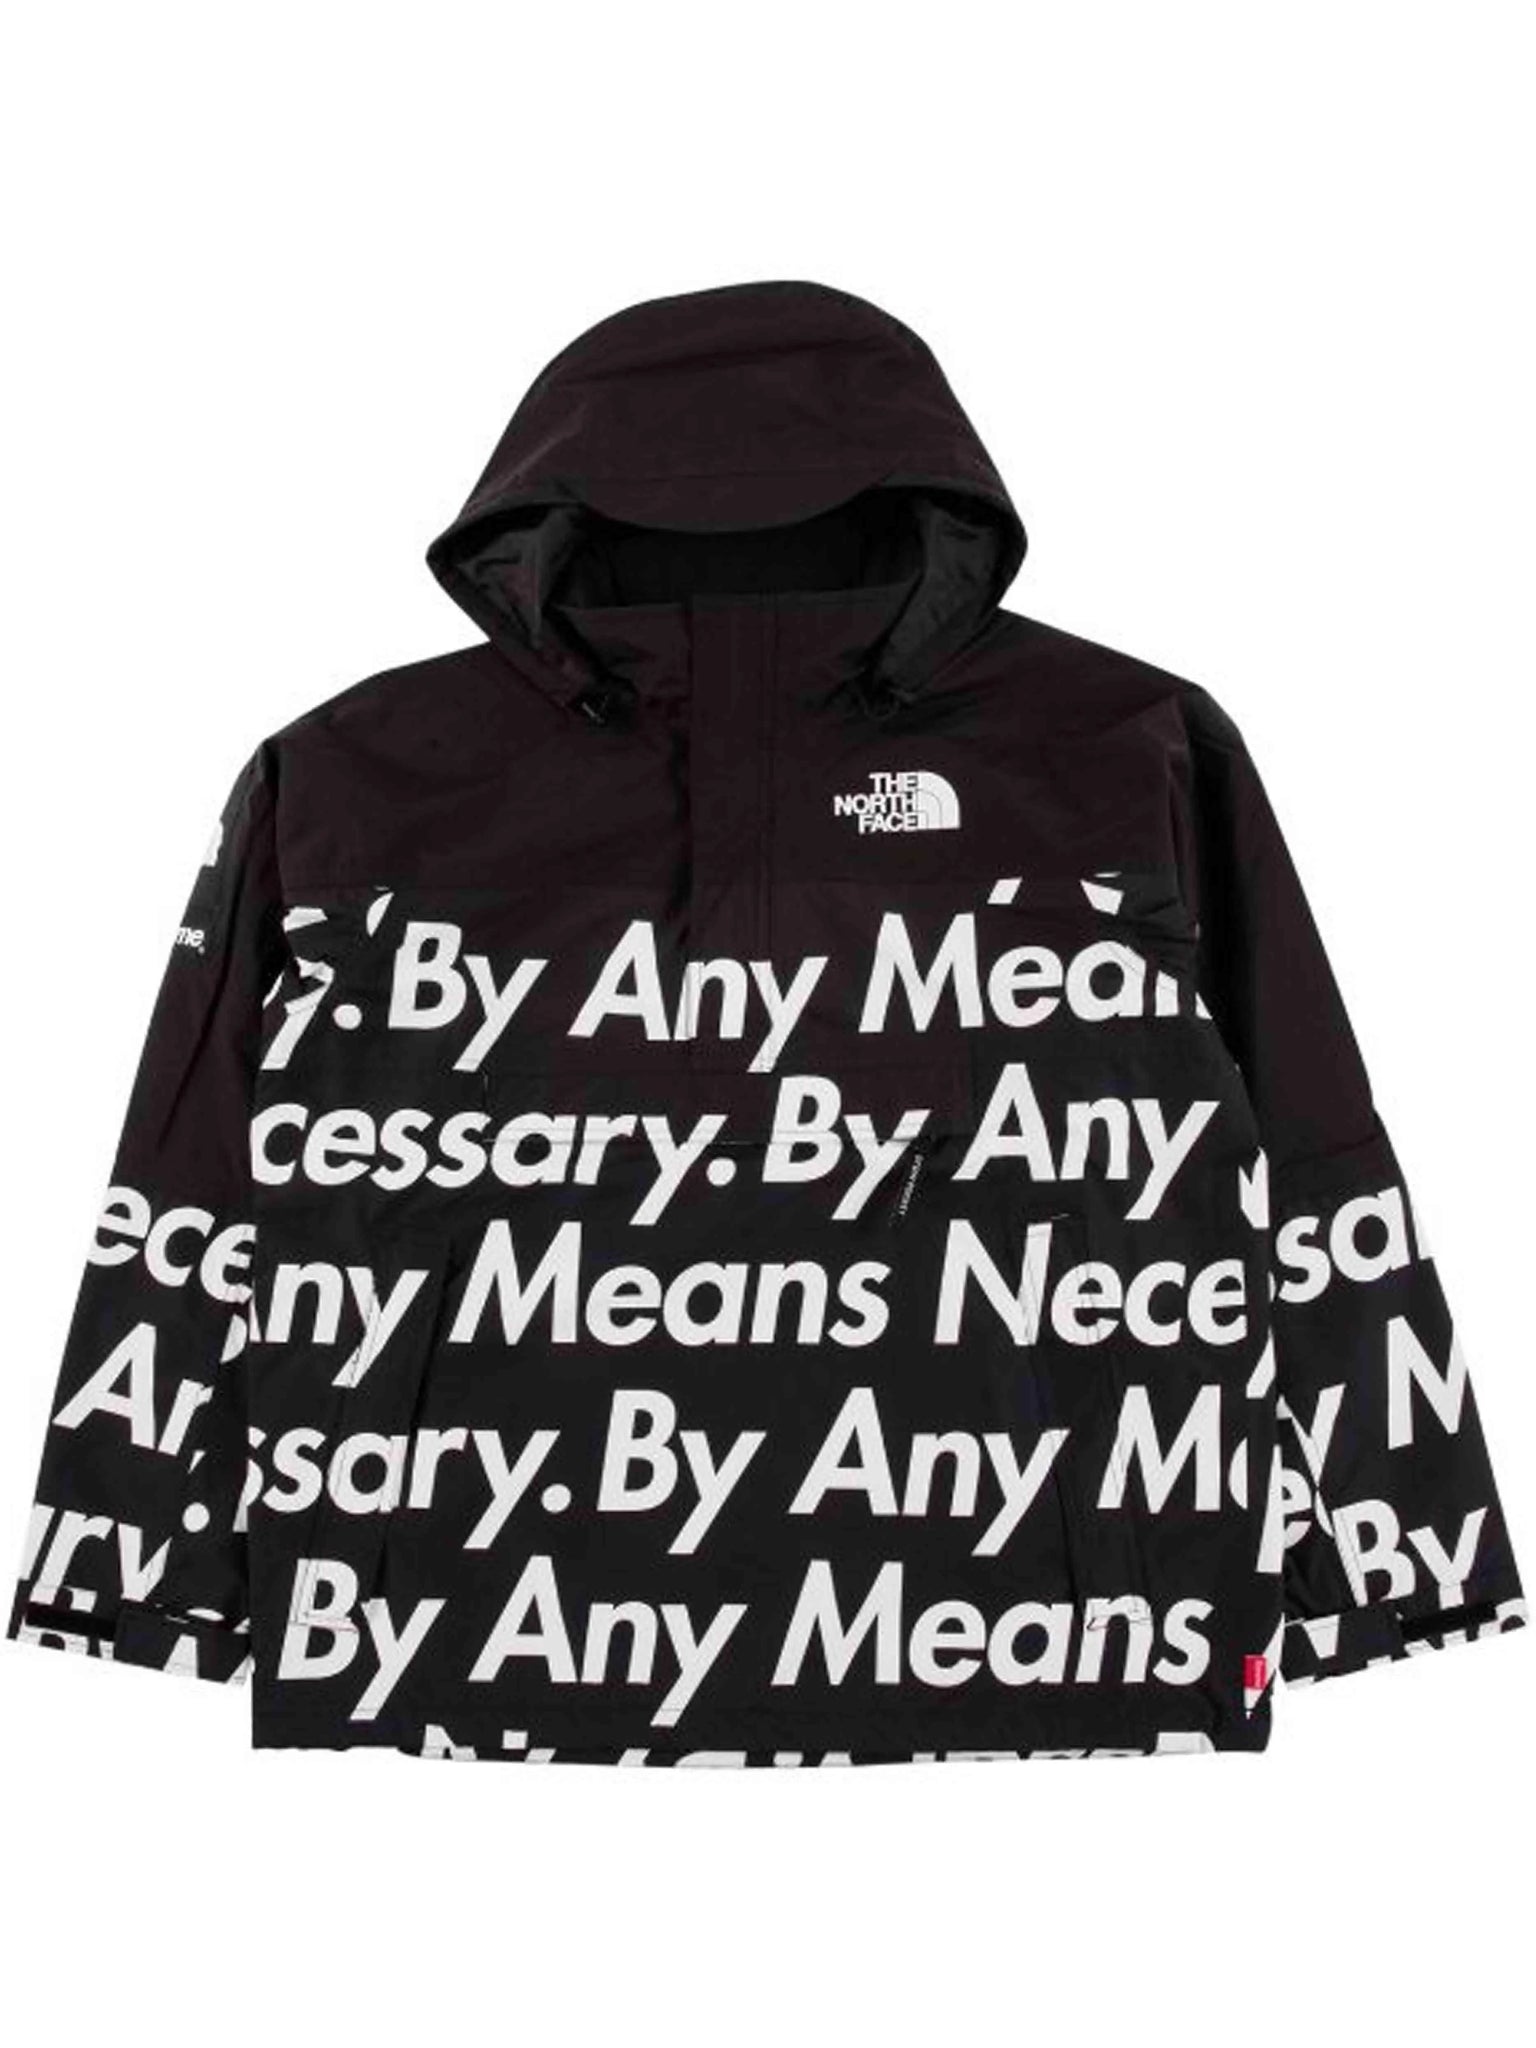 Supreme The North Face By Any Means Necessary Mountain Jacket Black [FW15] Prior